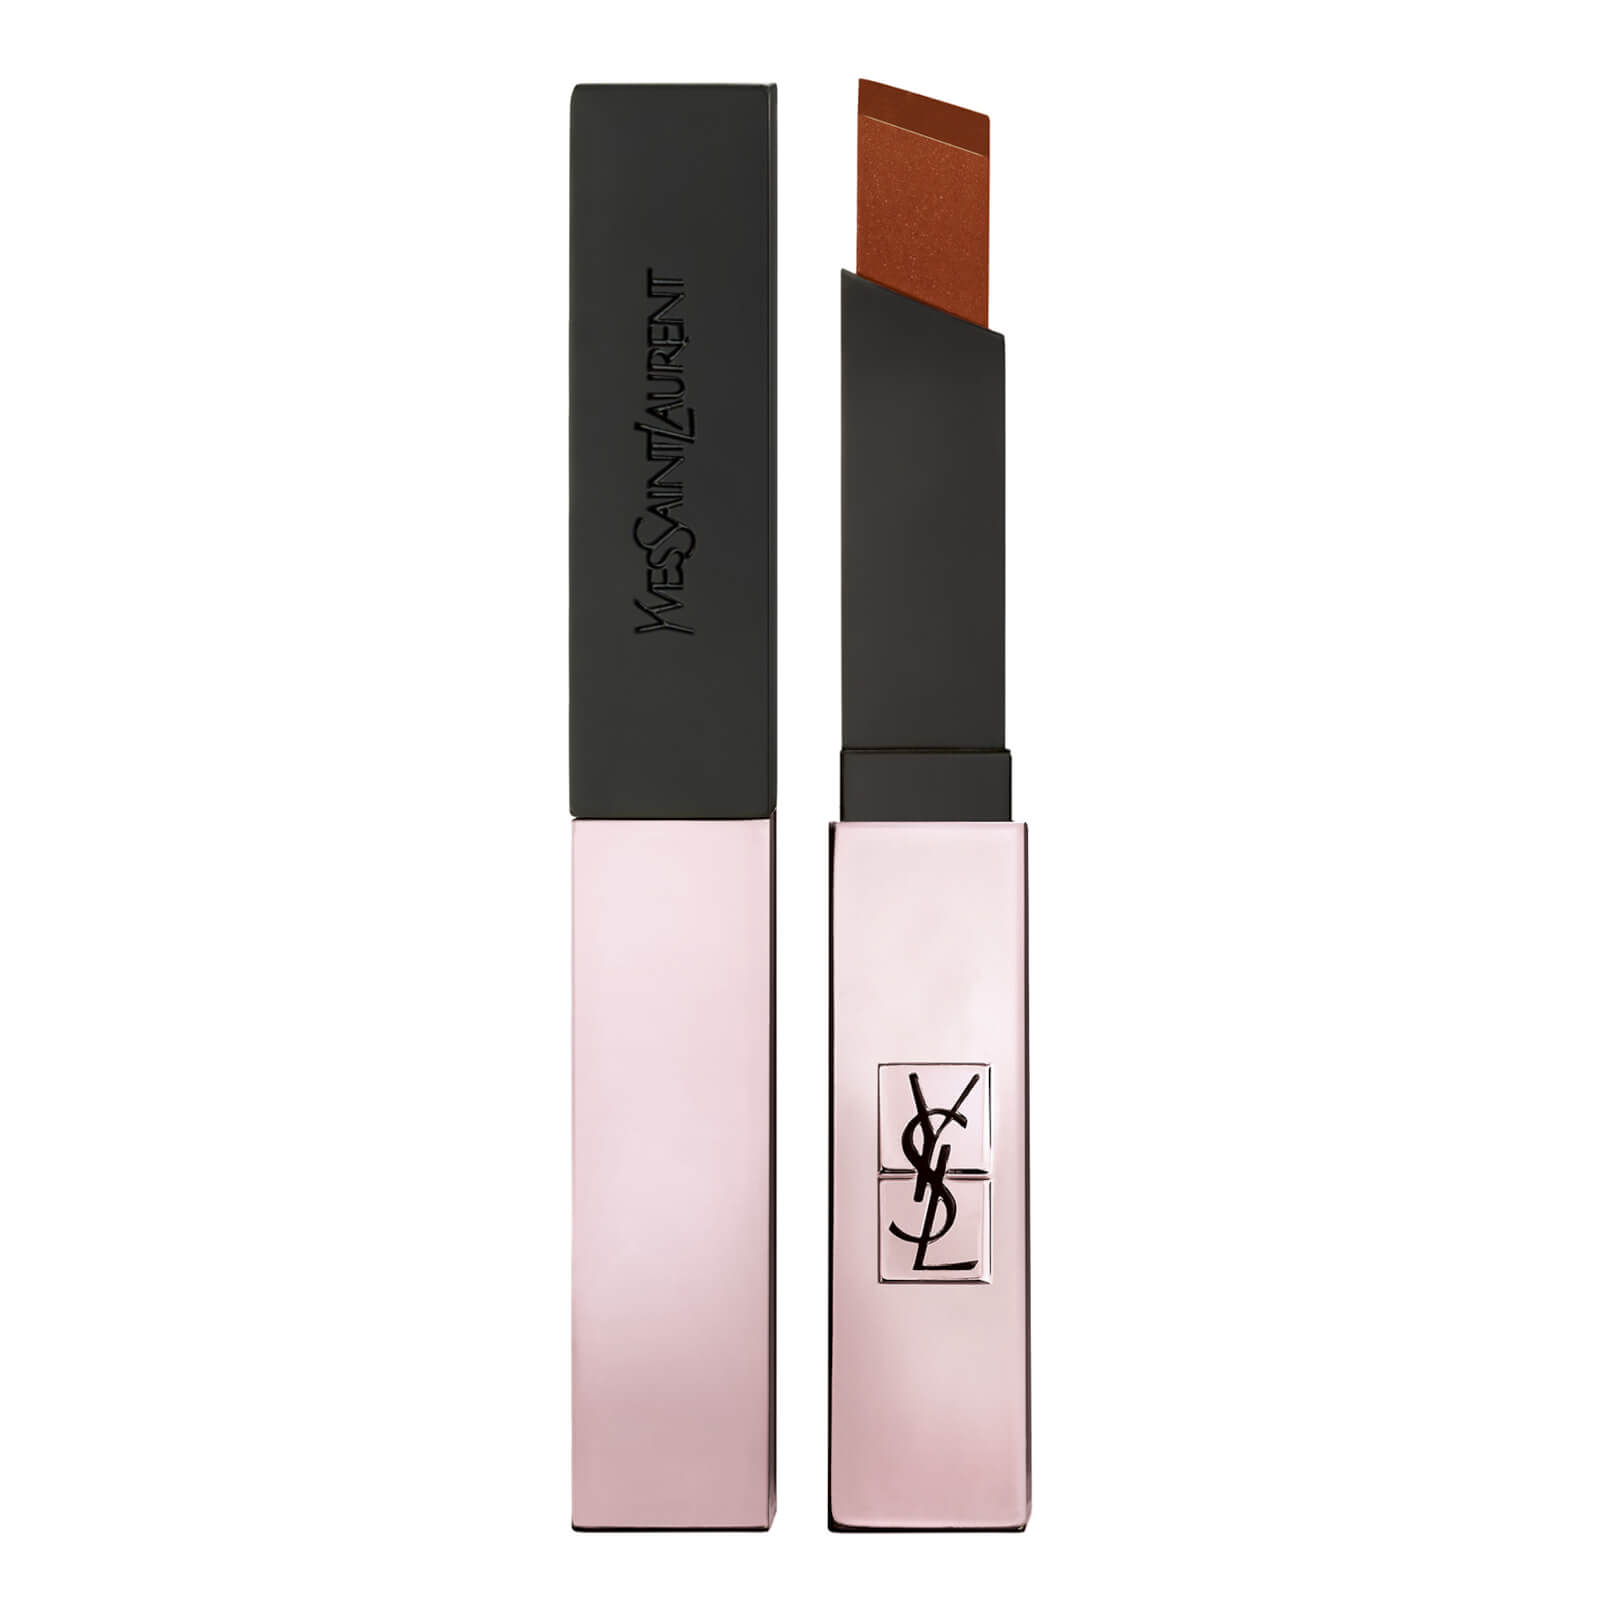 Image of Yves Saint Laurent Rouge Pur Couture The Slim Glow Matte Lipstick 2g (Various Shades) - 214 No Taboo Orange